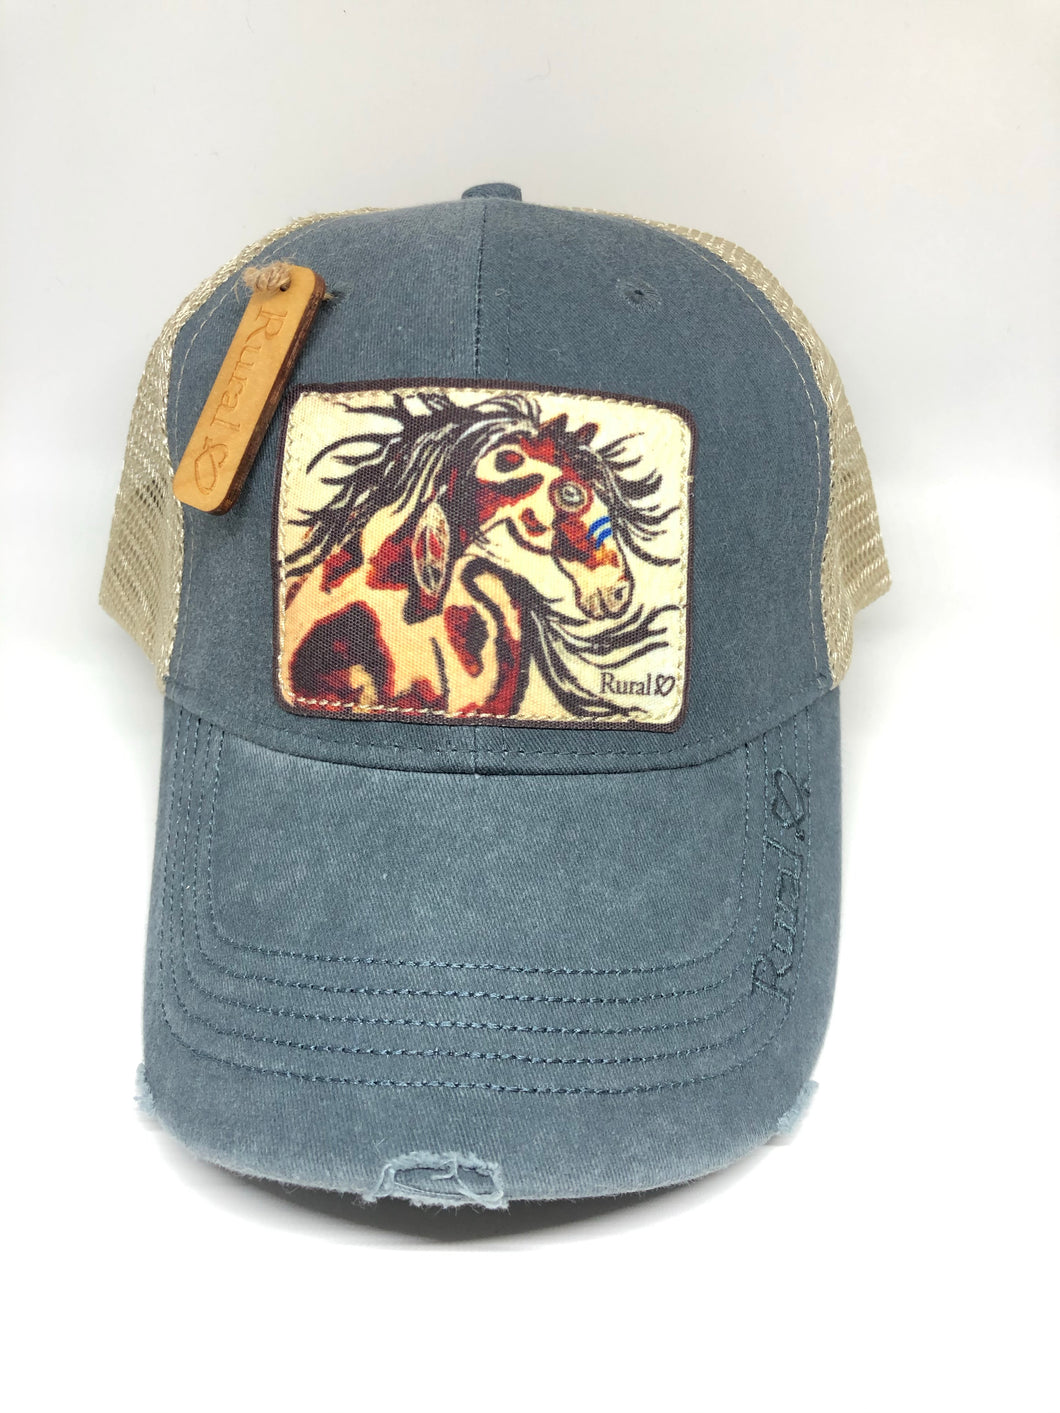 Rural Heart by Rene Earnhardt “Painted Pony” ball cap in denim or turquoise ball cap with Velcro closure.